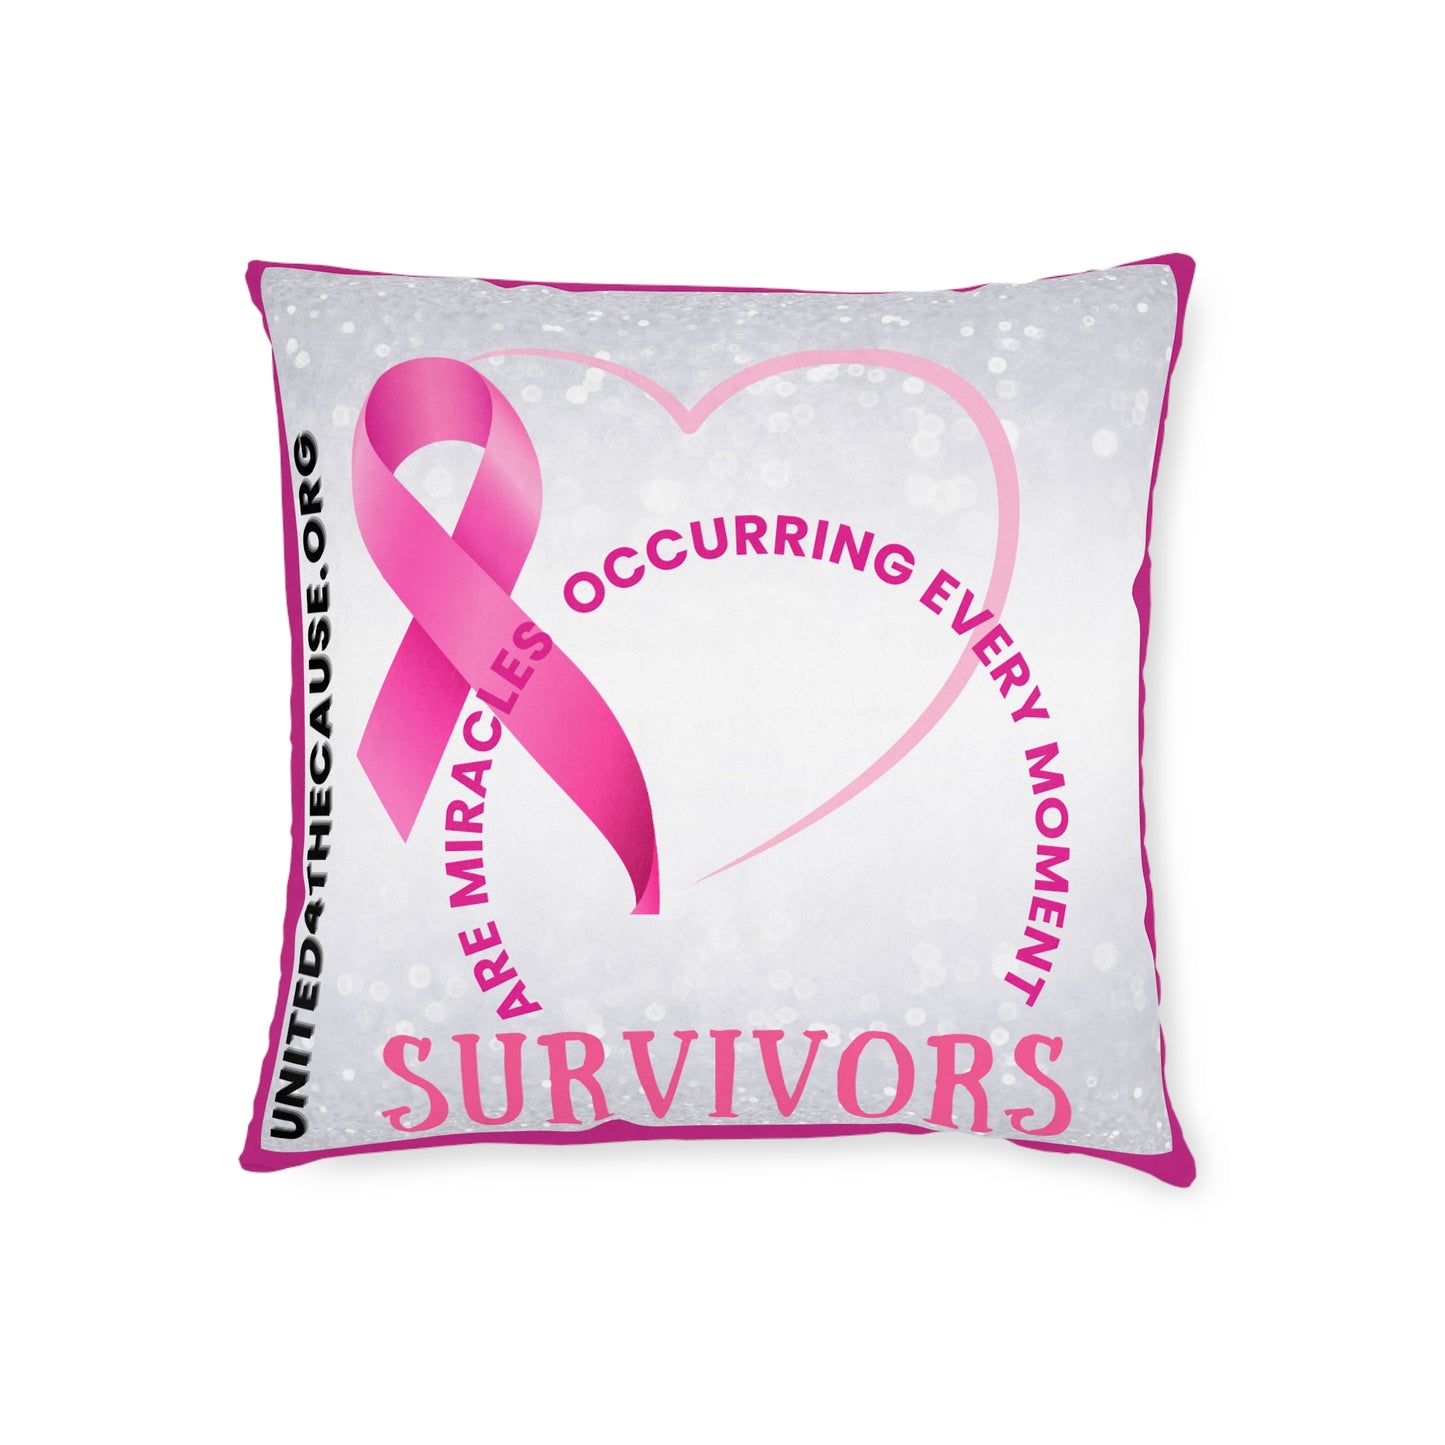 Survivors are miracles occurring every moment - Decorative Square Pillow